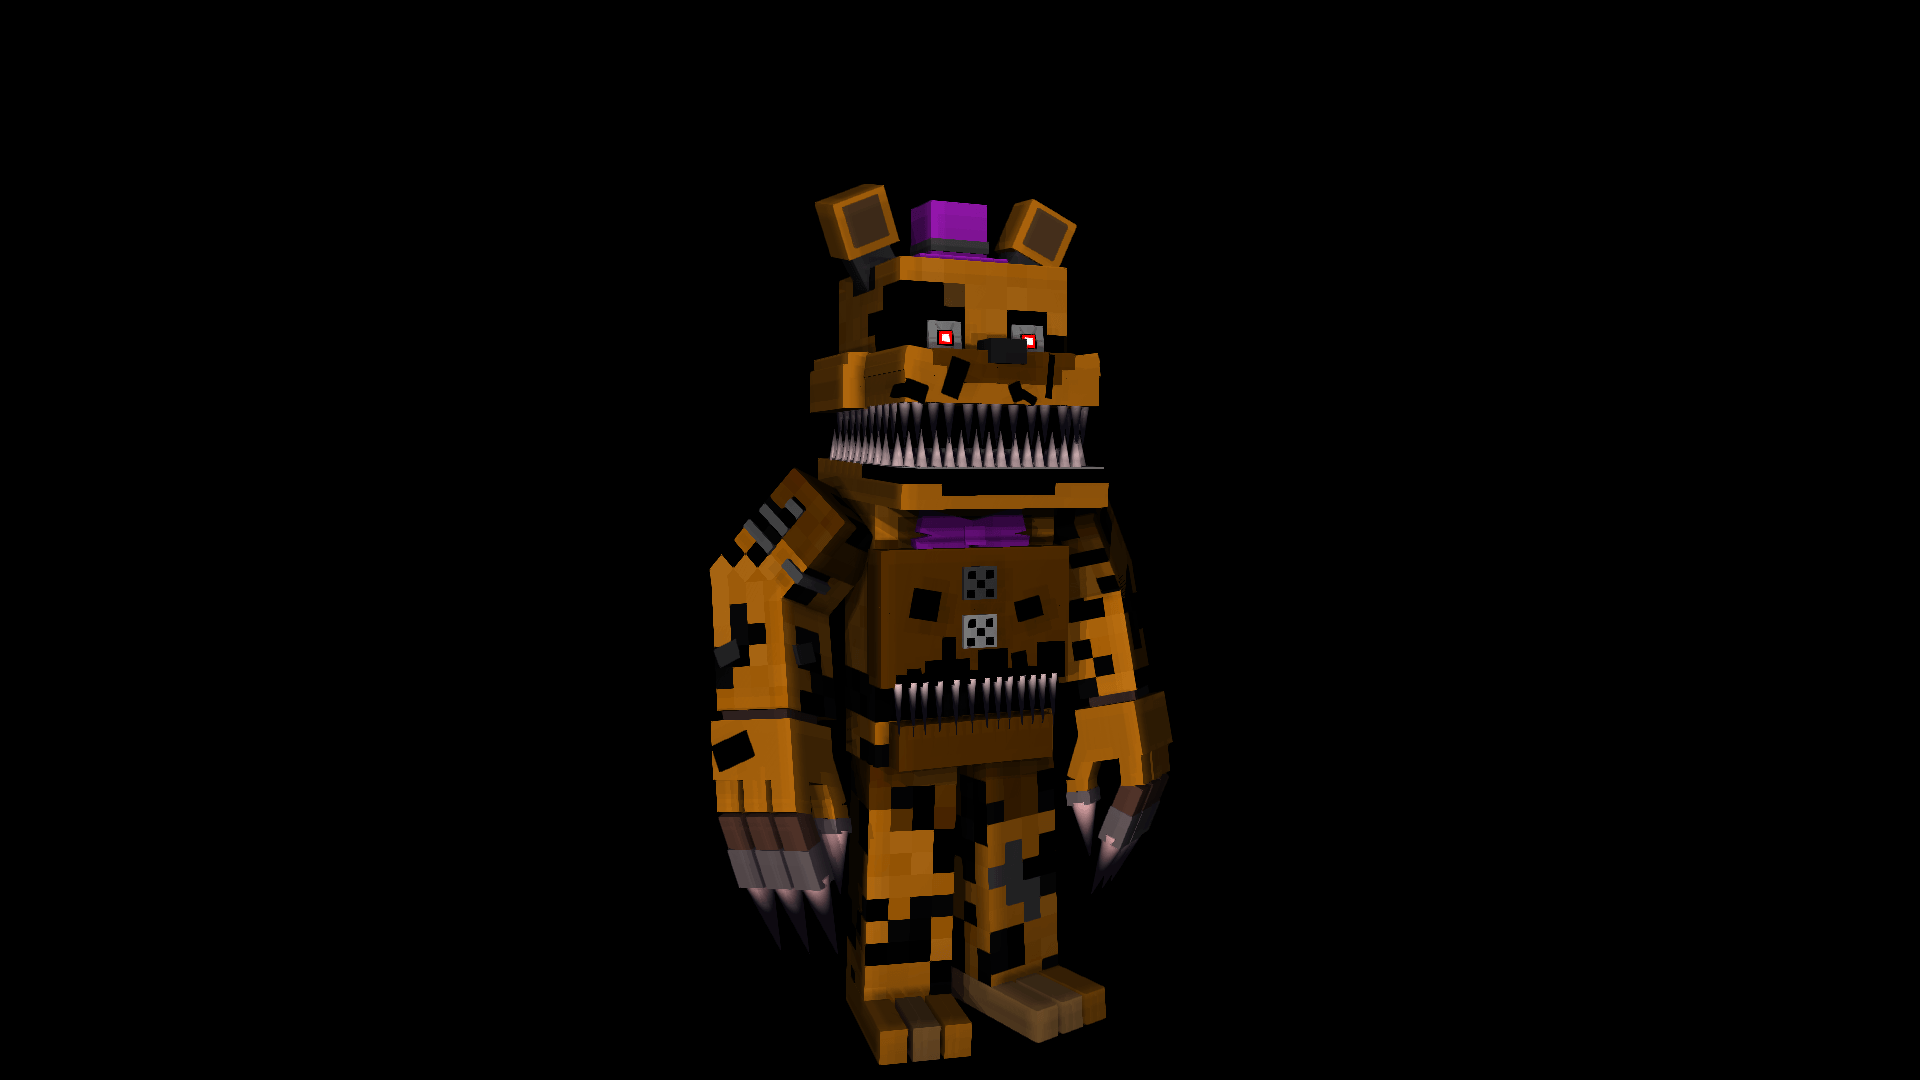 Nightmare Fredbear Full Body Finished Wallpaper and art